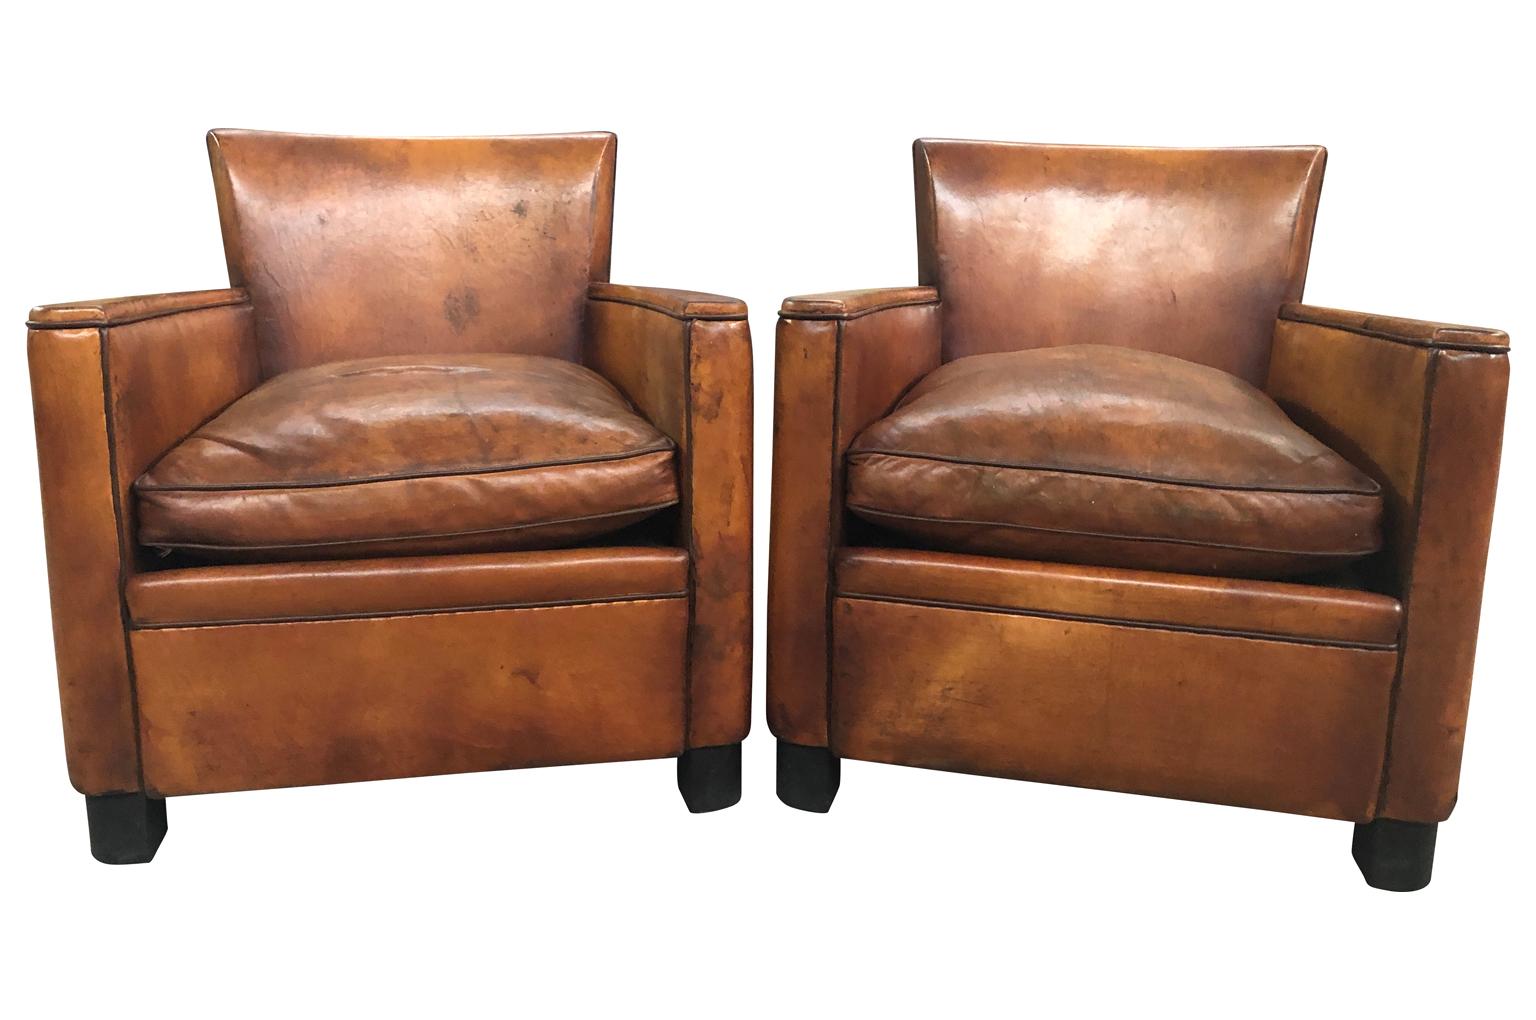 20th Century Pair of French Art Deco Style Club Chairs